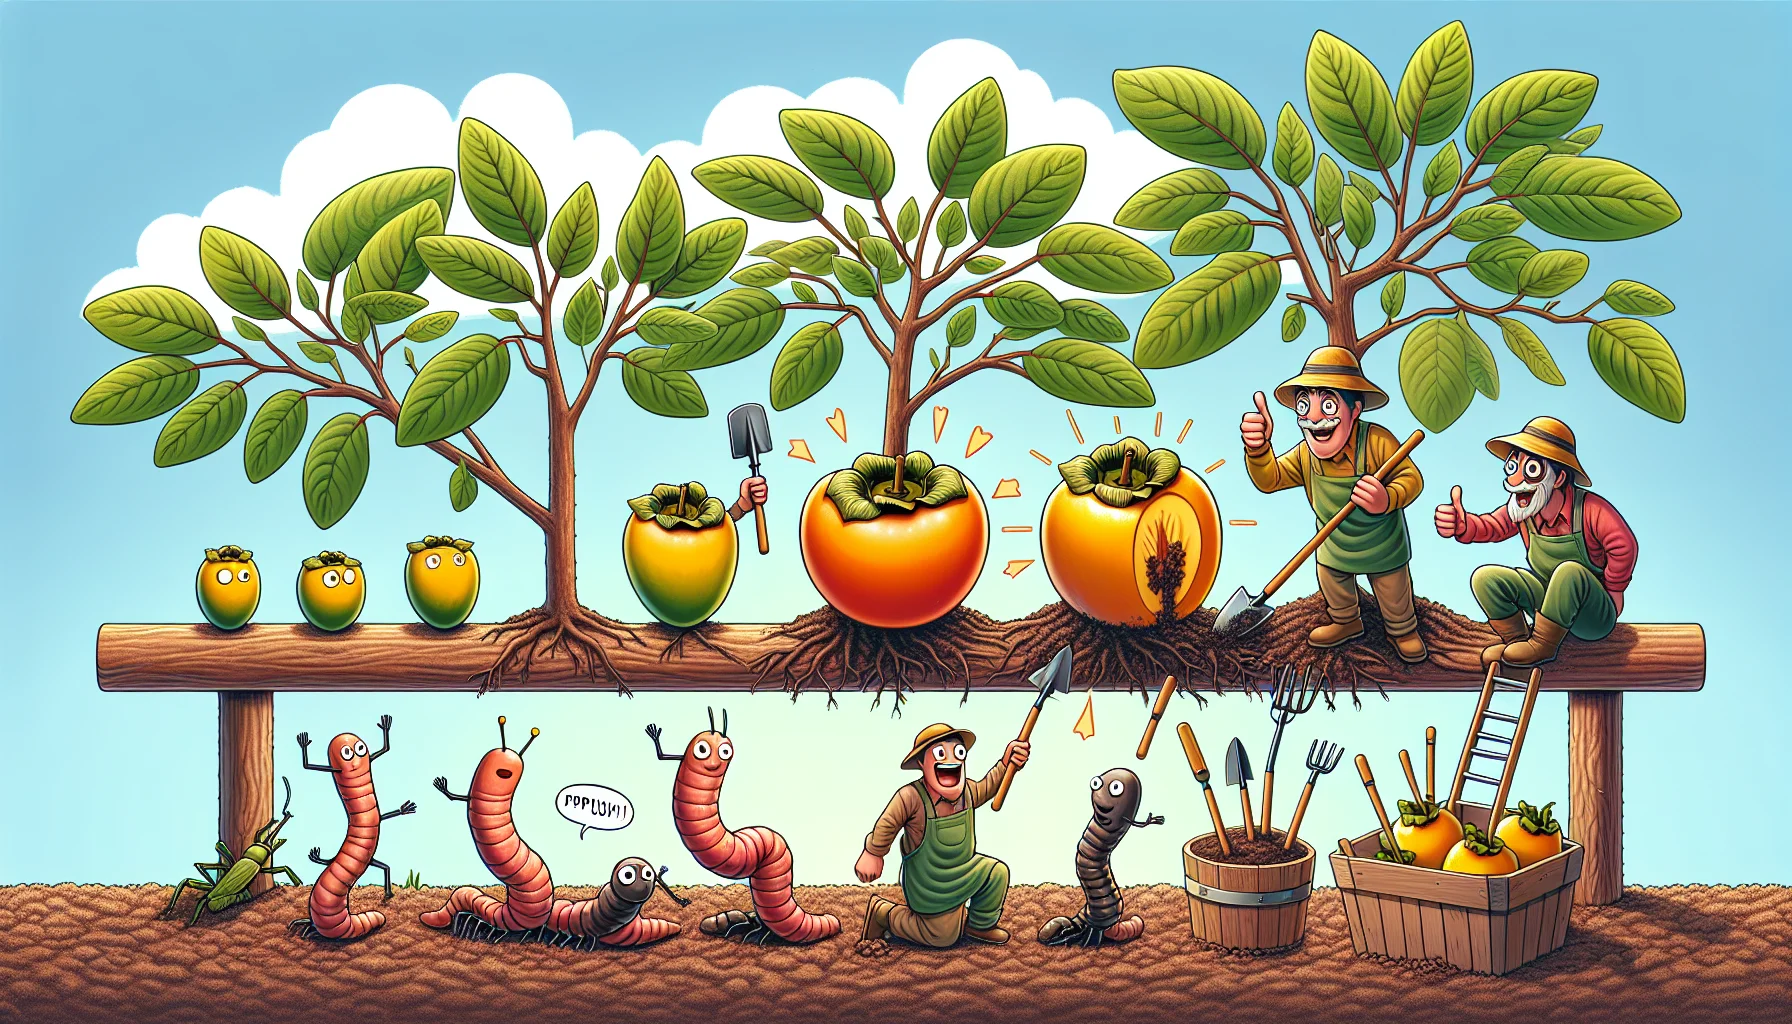 Create a humorous and engaging scenario representing the ripening of a persimmon fruit, in a garden environment. Show a persimmon tree with a single fruit moving through stages of ripeness - from a hard, pale yellow-green fruit to a juicy, rich orange fruit ready for harvest. Complement the scene with animated garden tools surrounding the persimmon tree and cheering for the persimmon as it ripens, giving it 'thumbs up'. To enrich the gardening atmosphere, add some common garden critters such as earthworms and beetles who are also joining in the cheering. Enhance the humor and fun in the scene by having speech balloons from the animated garden tools and the critters expressing excitement and suspense as the persimmon's ripening progresses.